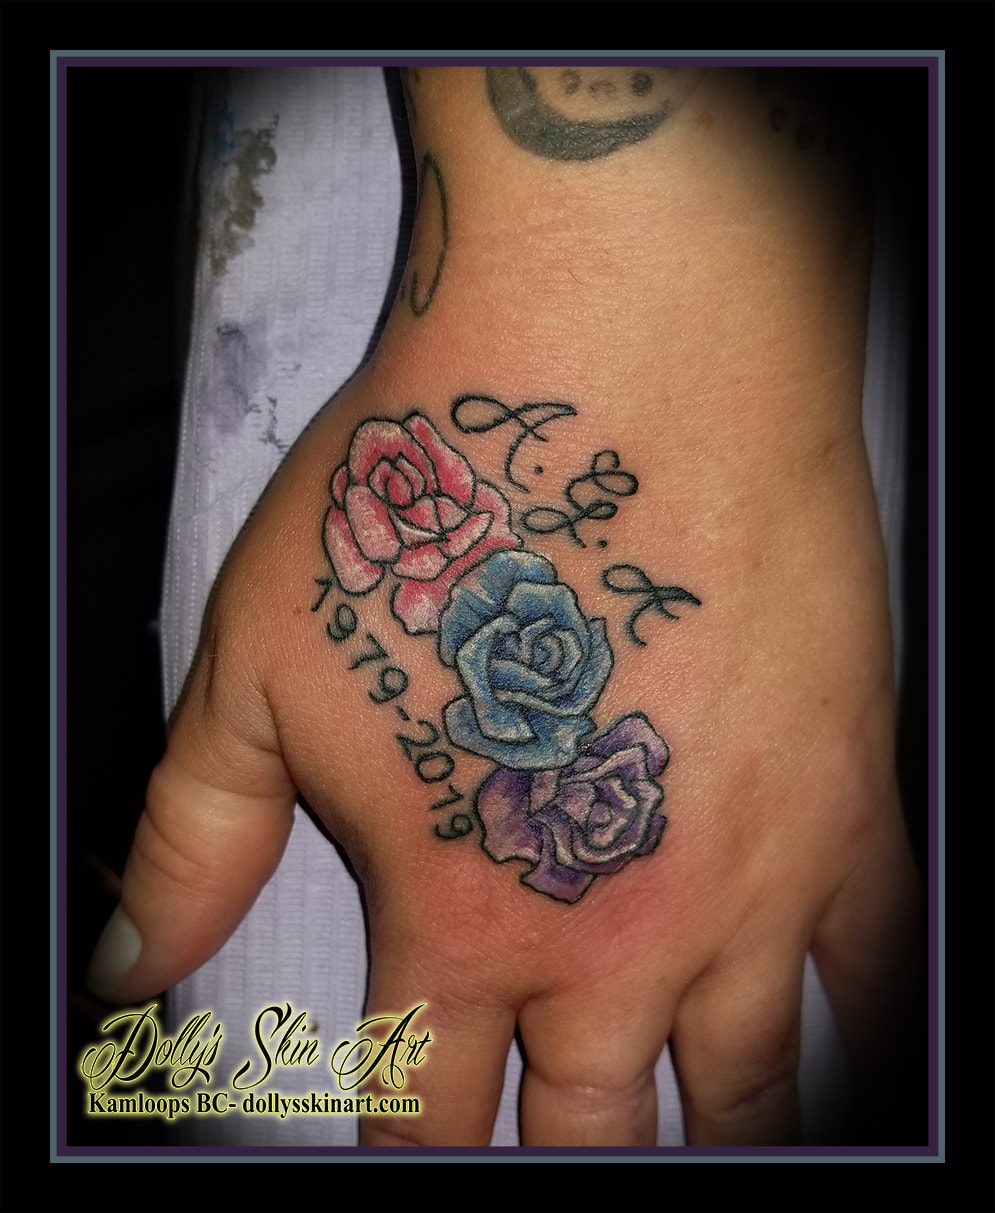 roses hand tattoo memorial flowers floral pink blue purple white lettering font A G A 1979-2019 tattoo kamloops dolly's skin art